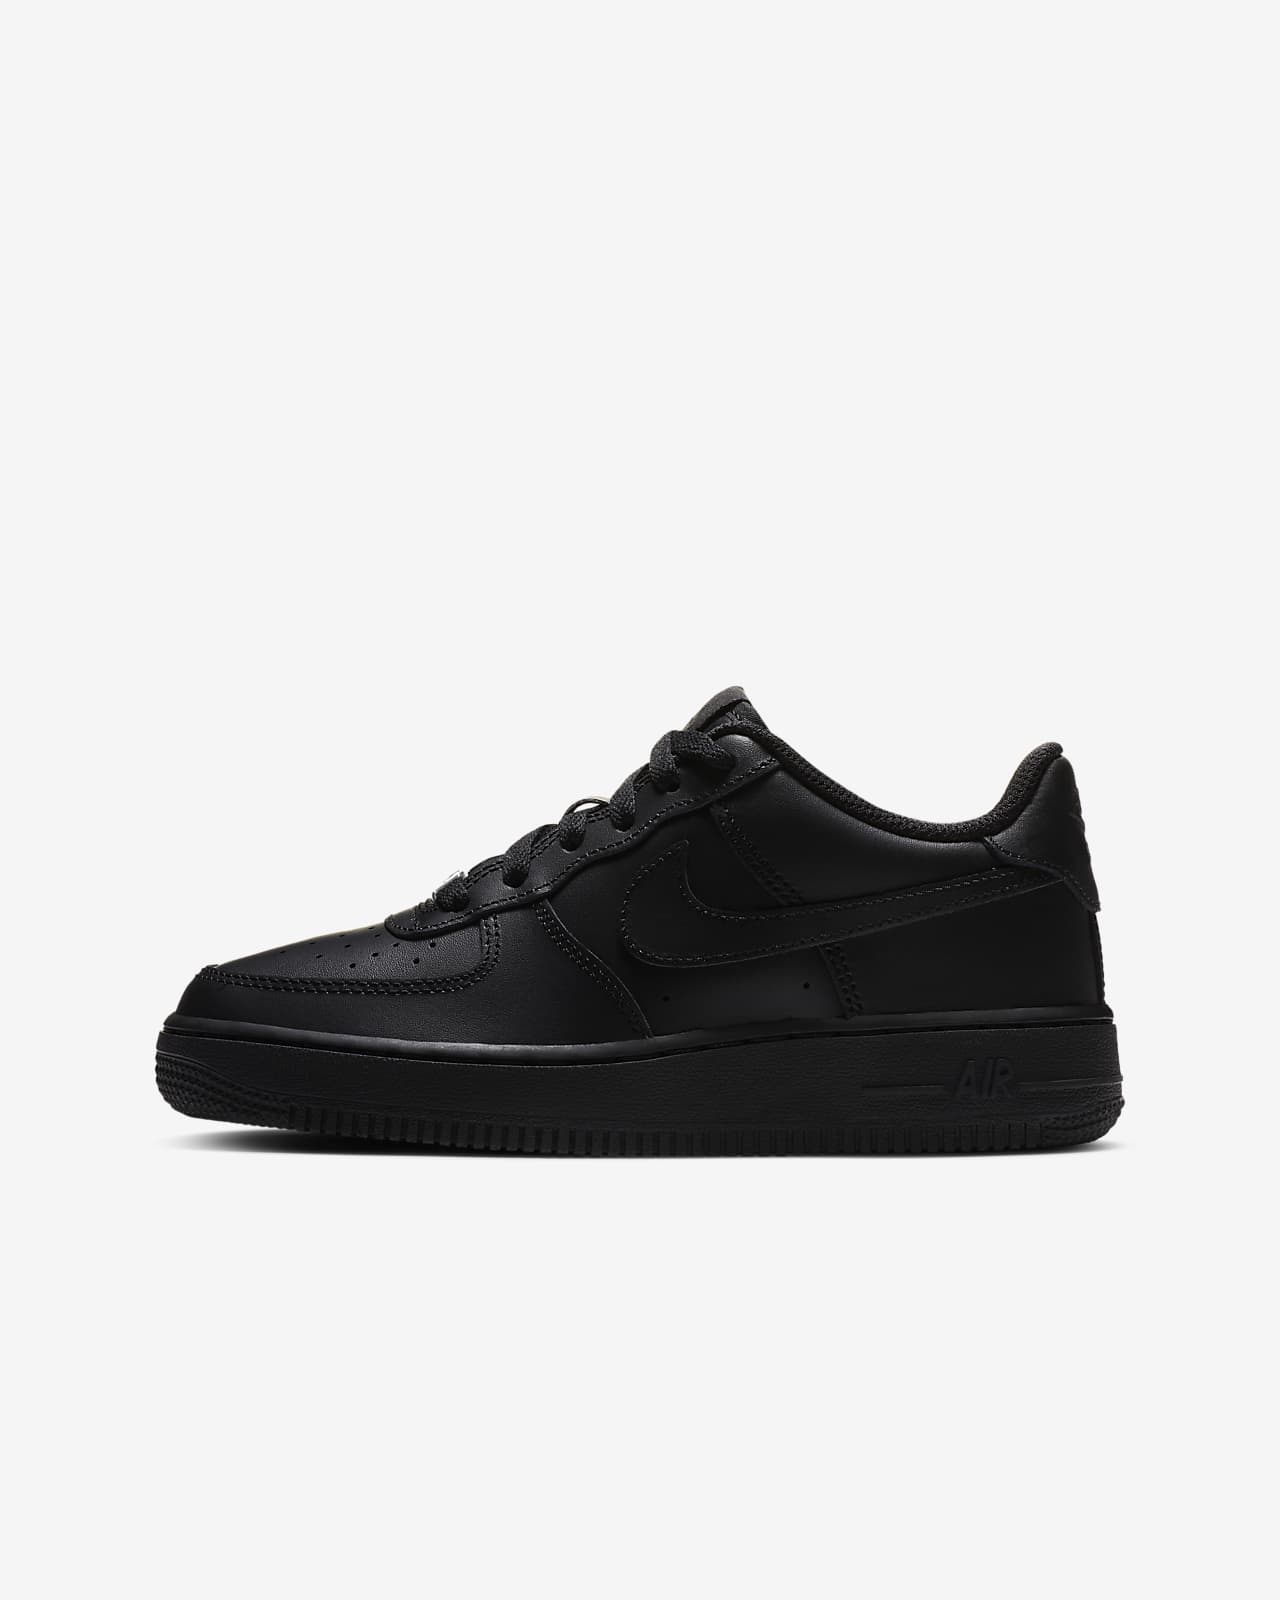 nike air force 1 size 6.5 mens